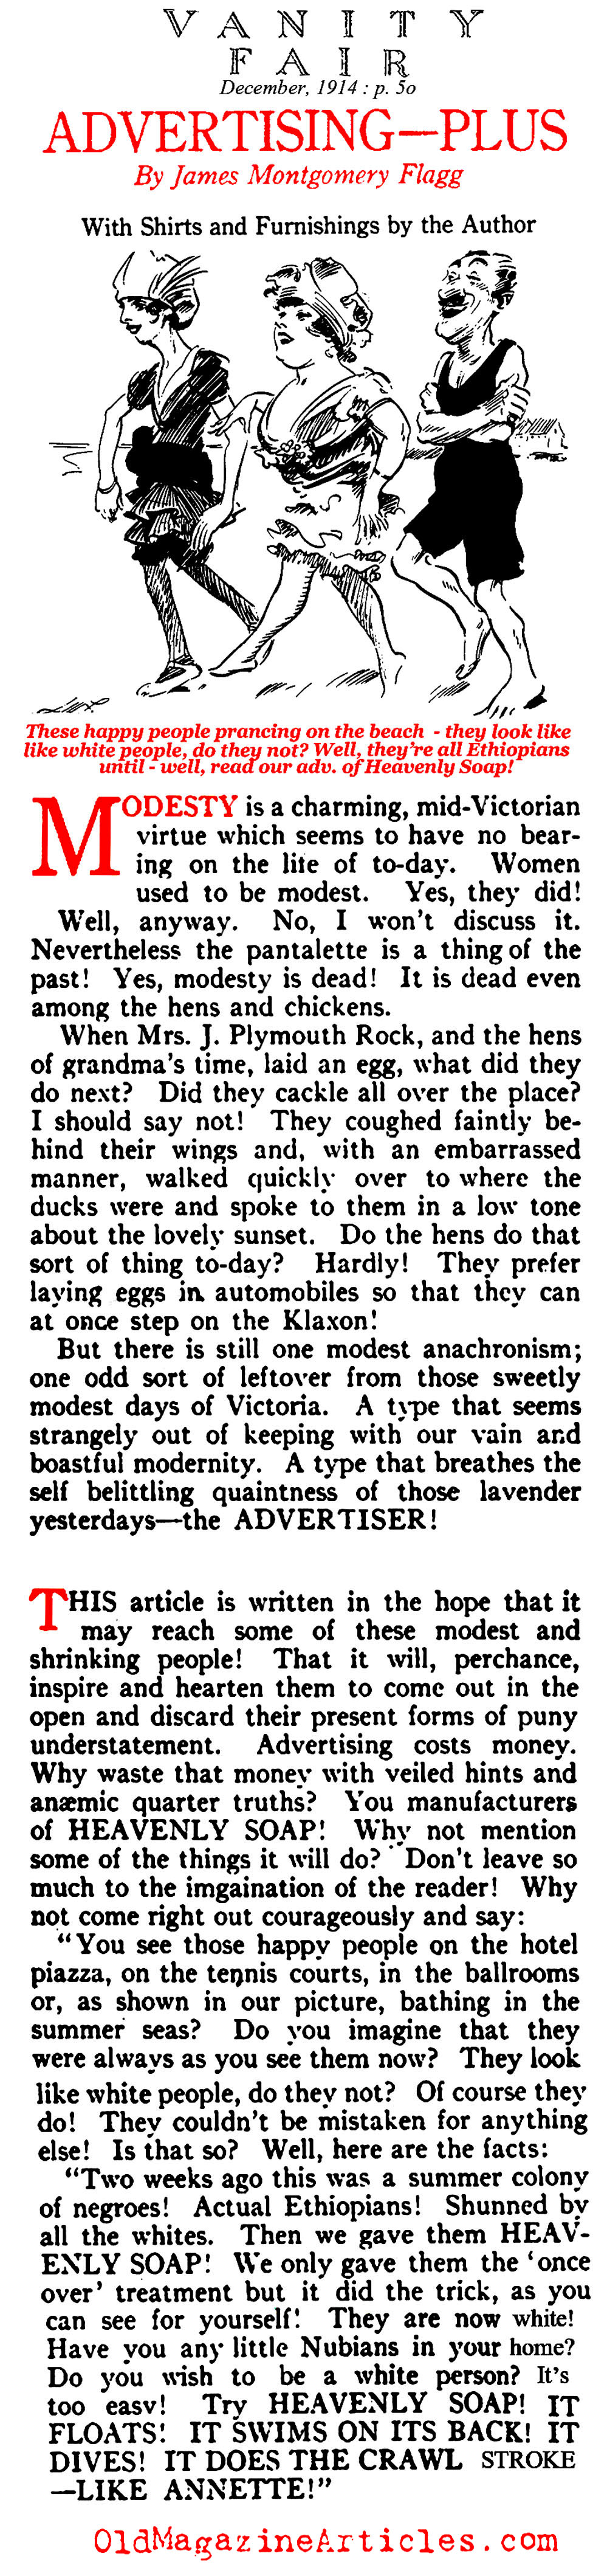 Mocking Ad Practices in the Early 20th Century (Vanity Fair Magazine, 1914)